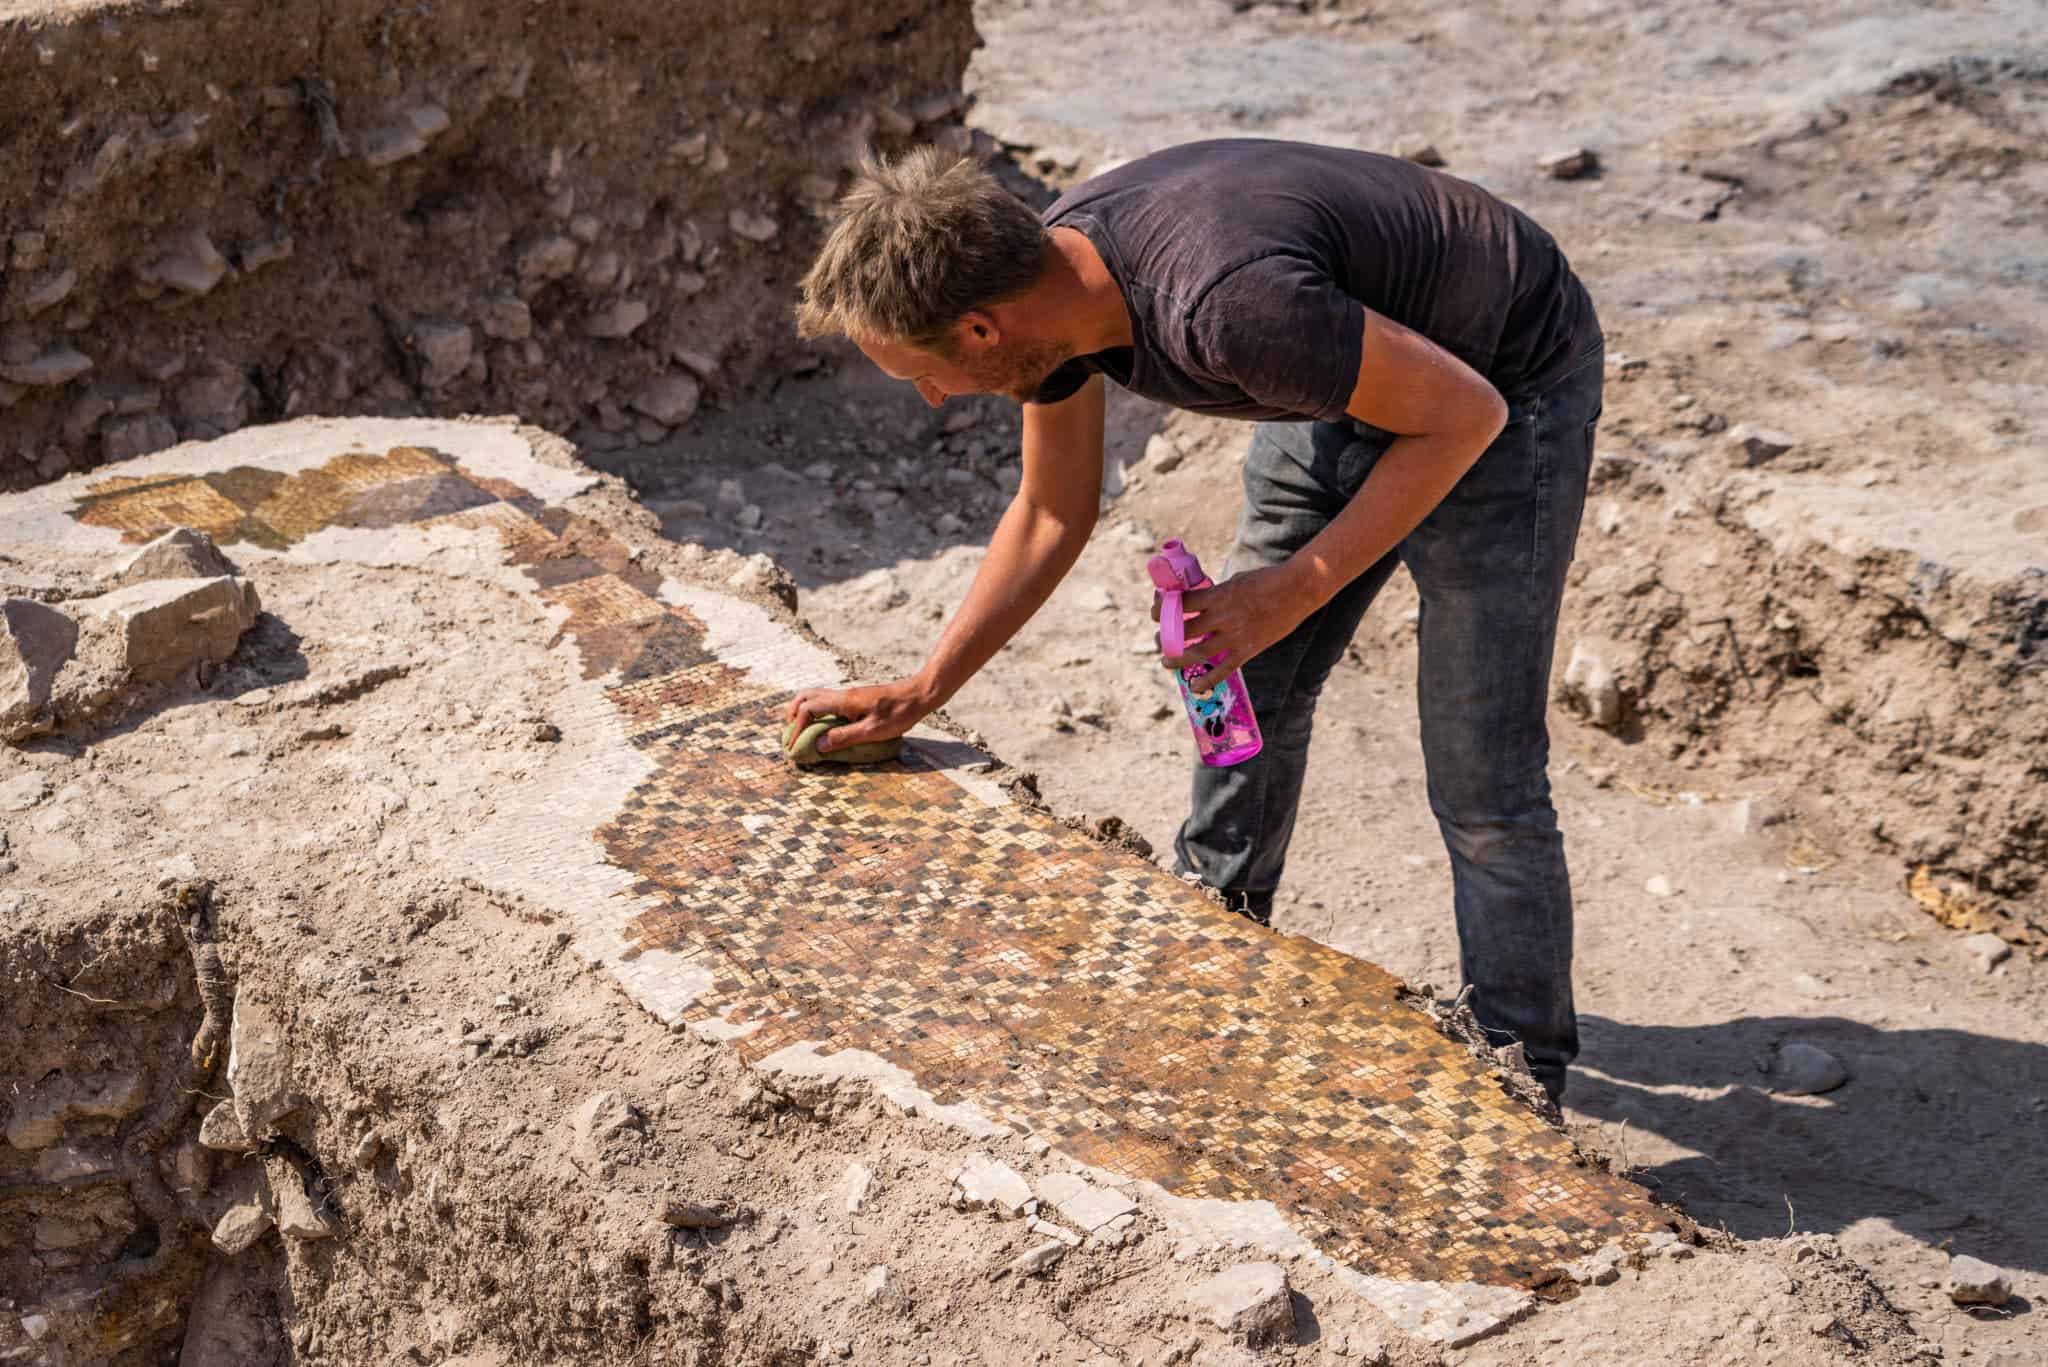 Cleaning of mosaic fragments in the area of the bathing facility. Image credits: Peter Jülich.